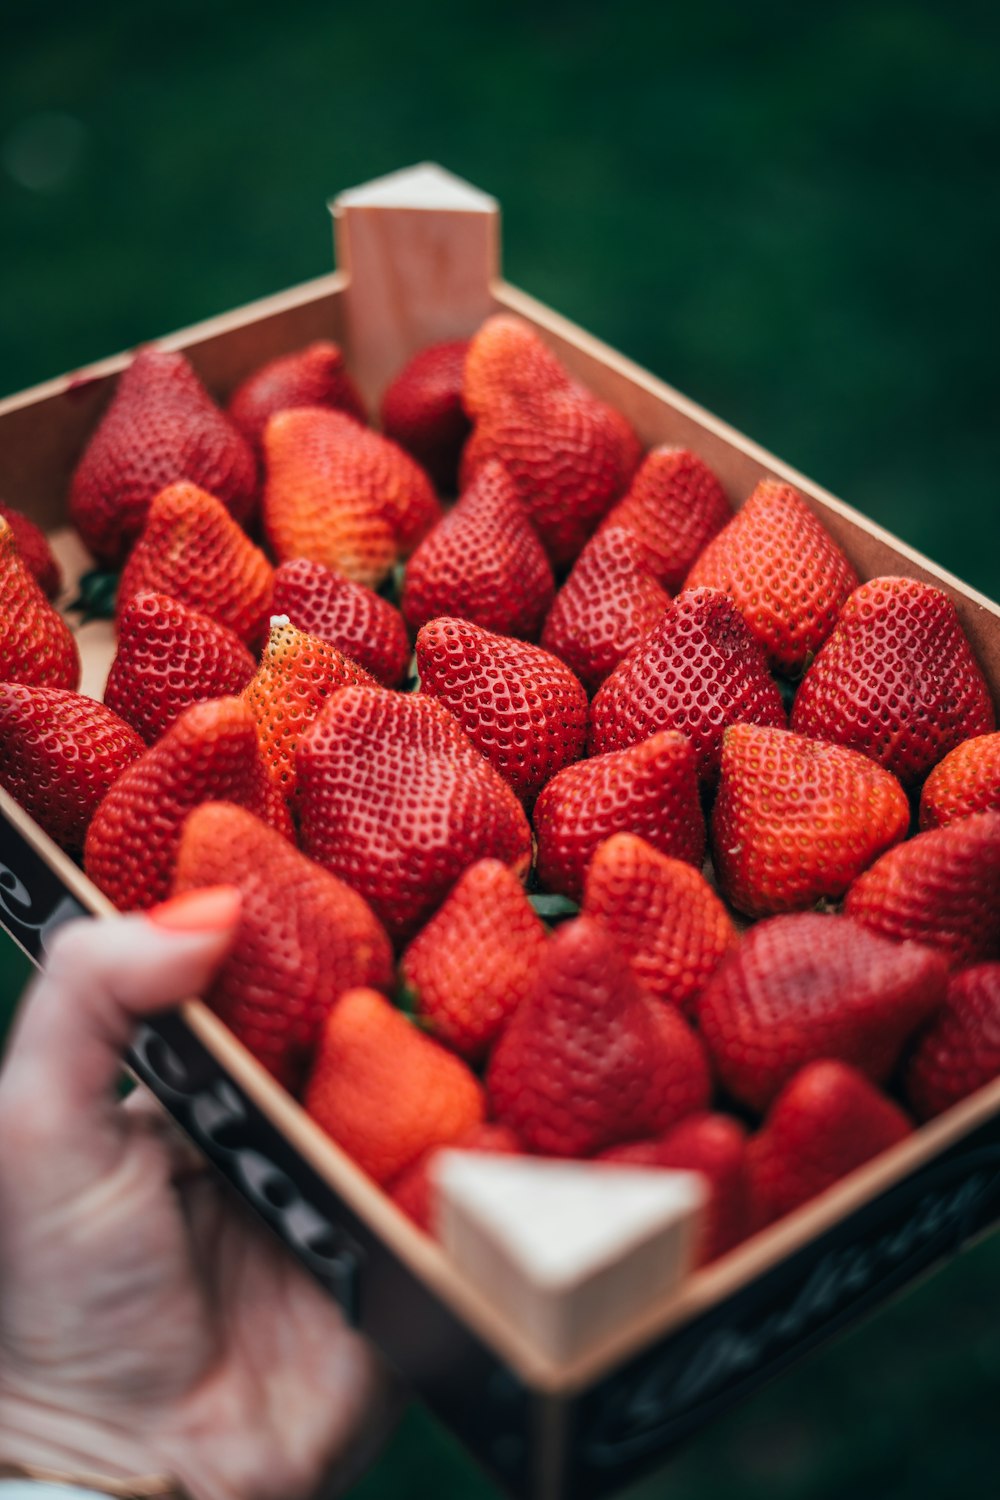 a hand holding a box of strawberries